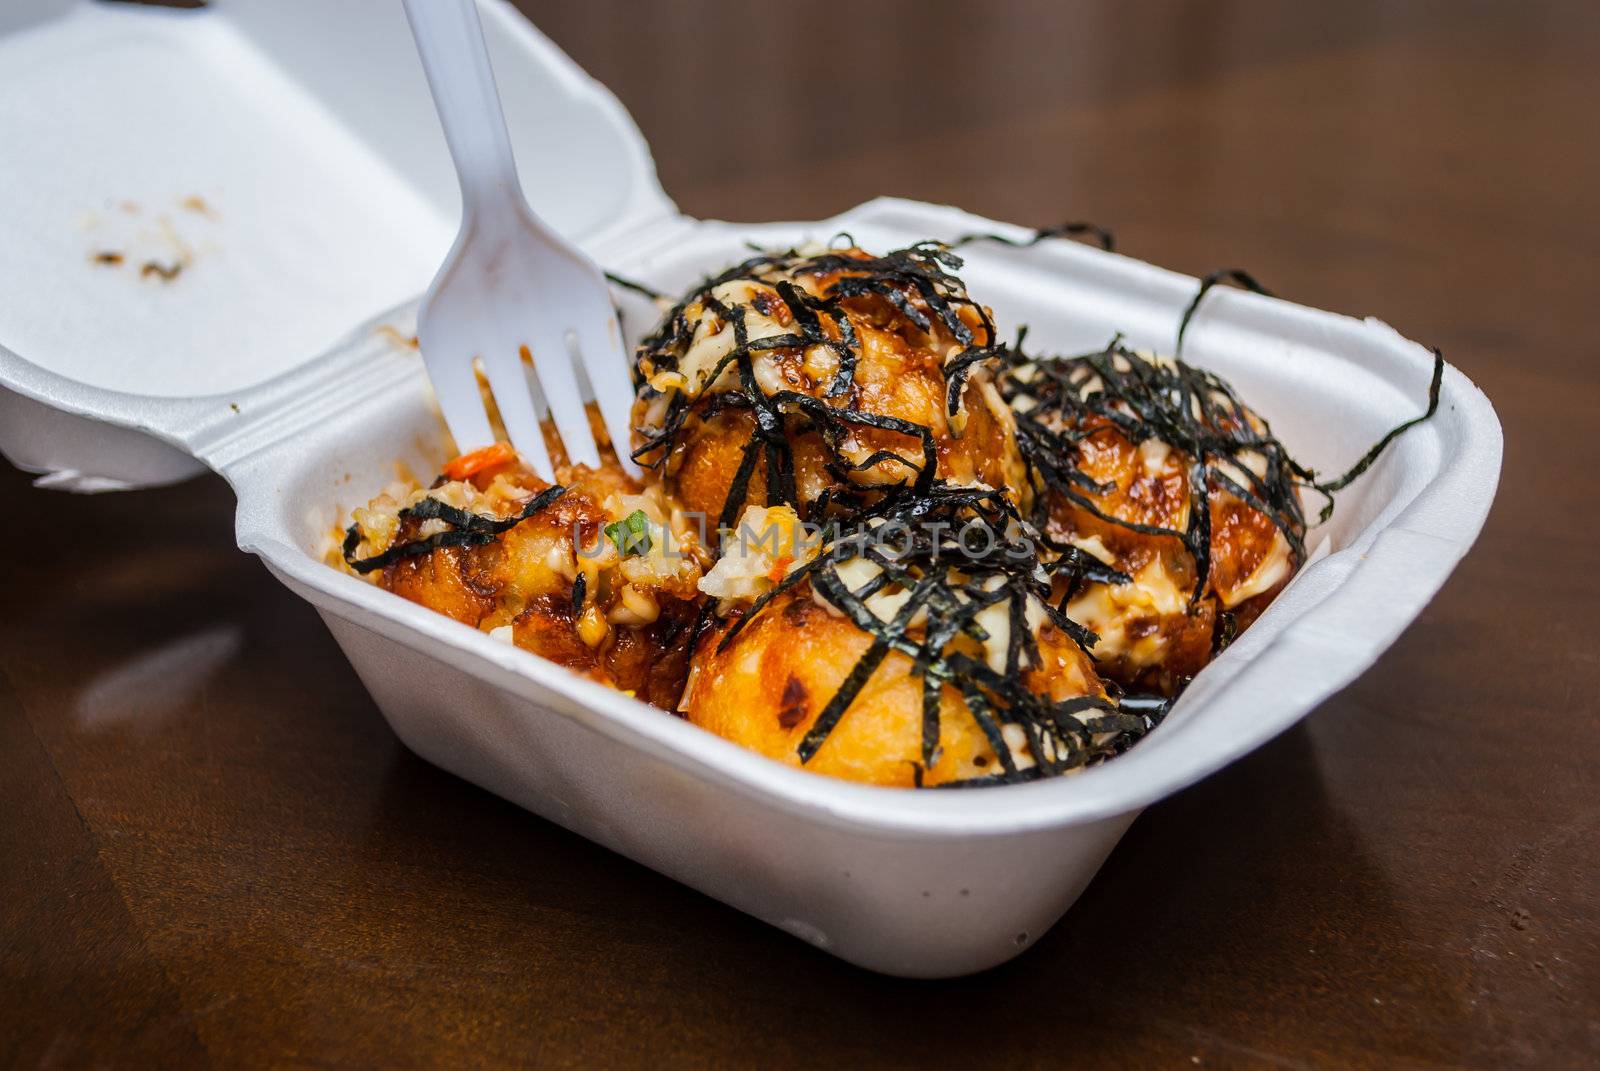 Takoyaki is a ball-shaped Japanese snack made of a wheat flour-based batter and cooked in a special takoyaki pan. It is typically filled with minced or diced octopus, tempura scraps (tenkasu), pickled ginger, and green onion. is Japanese food,  